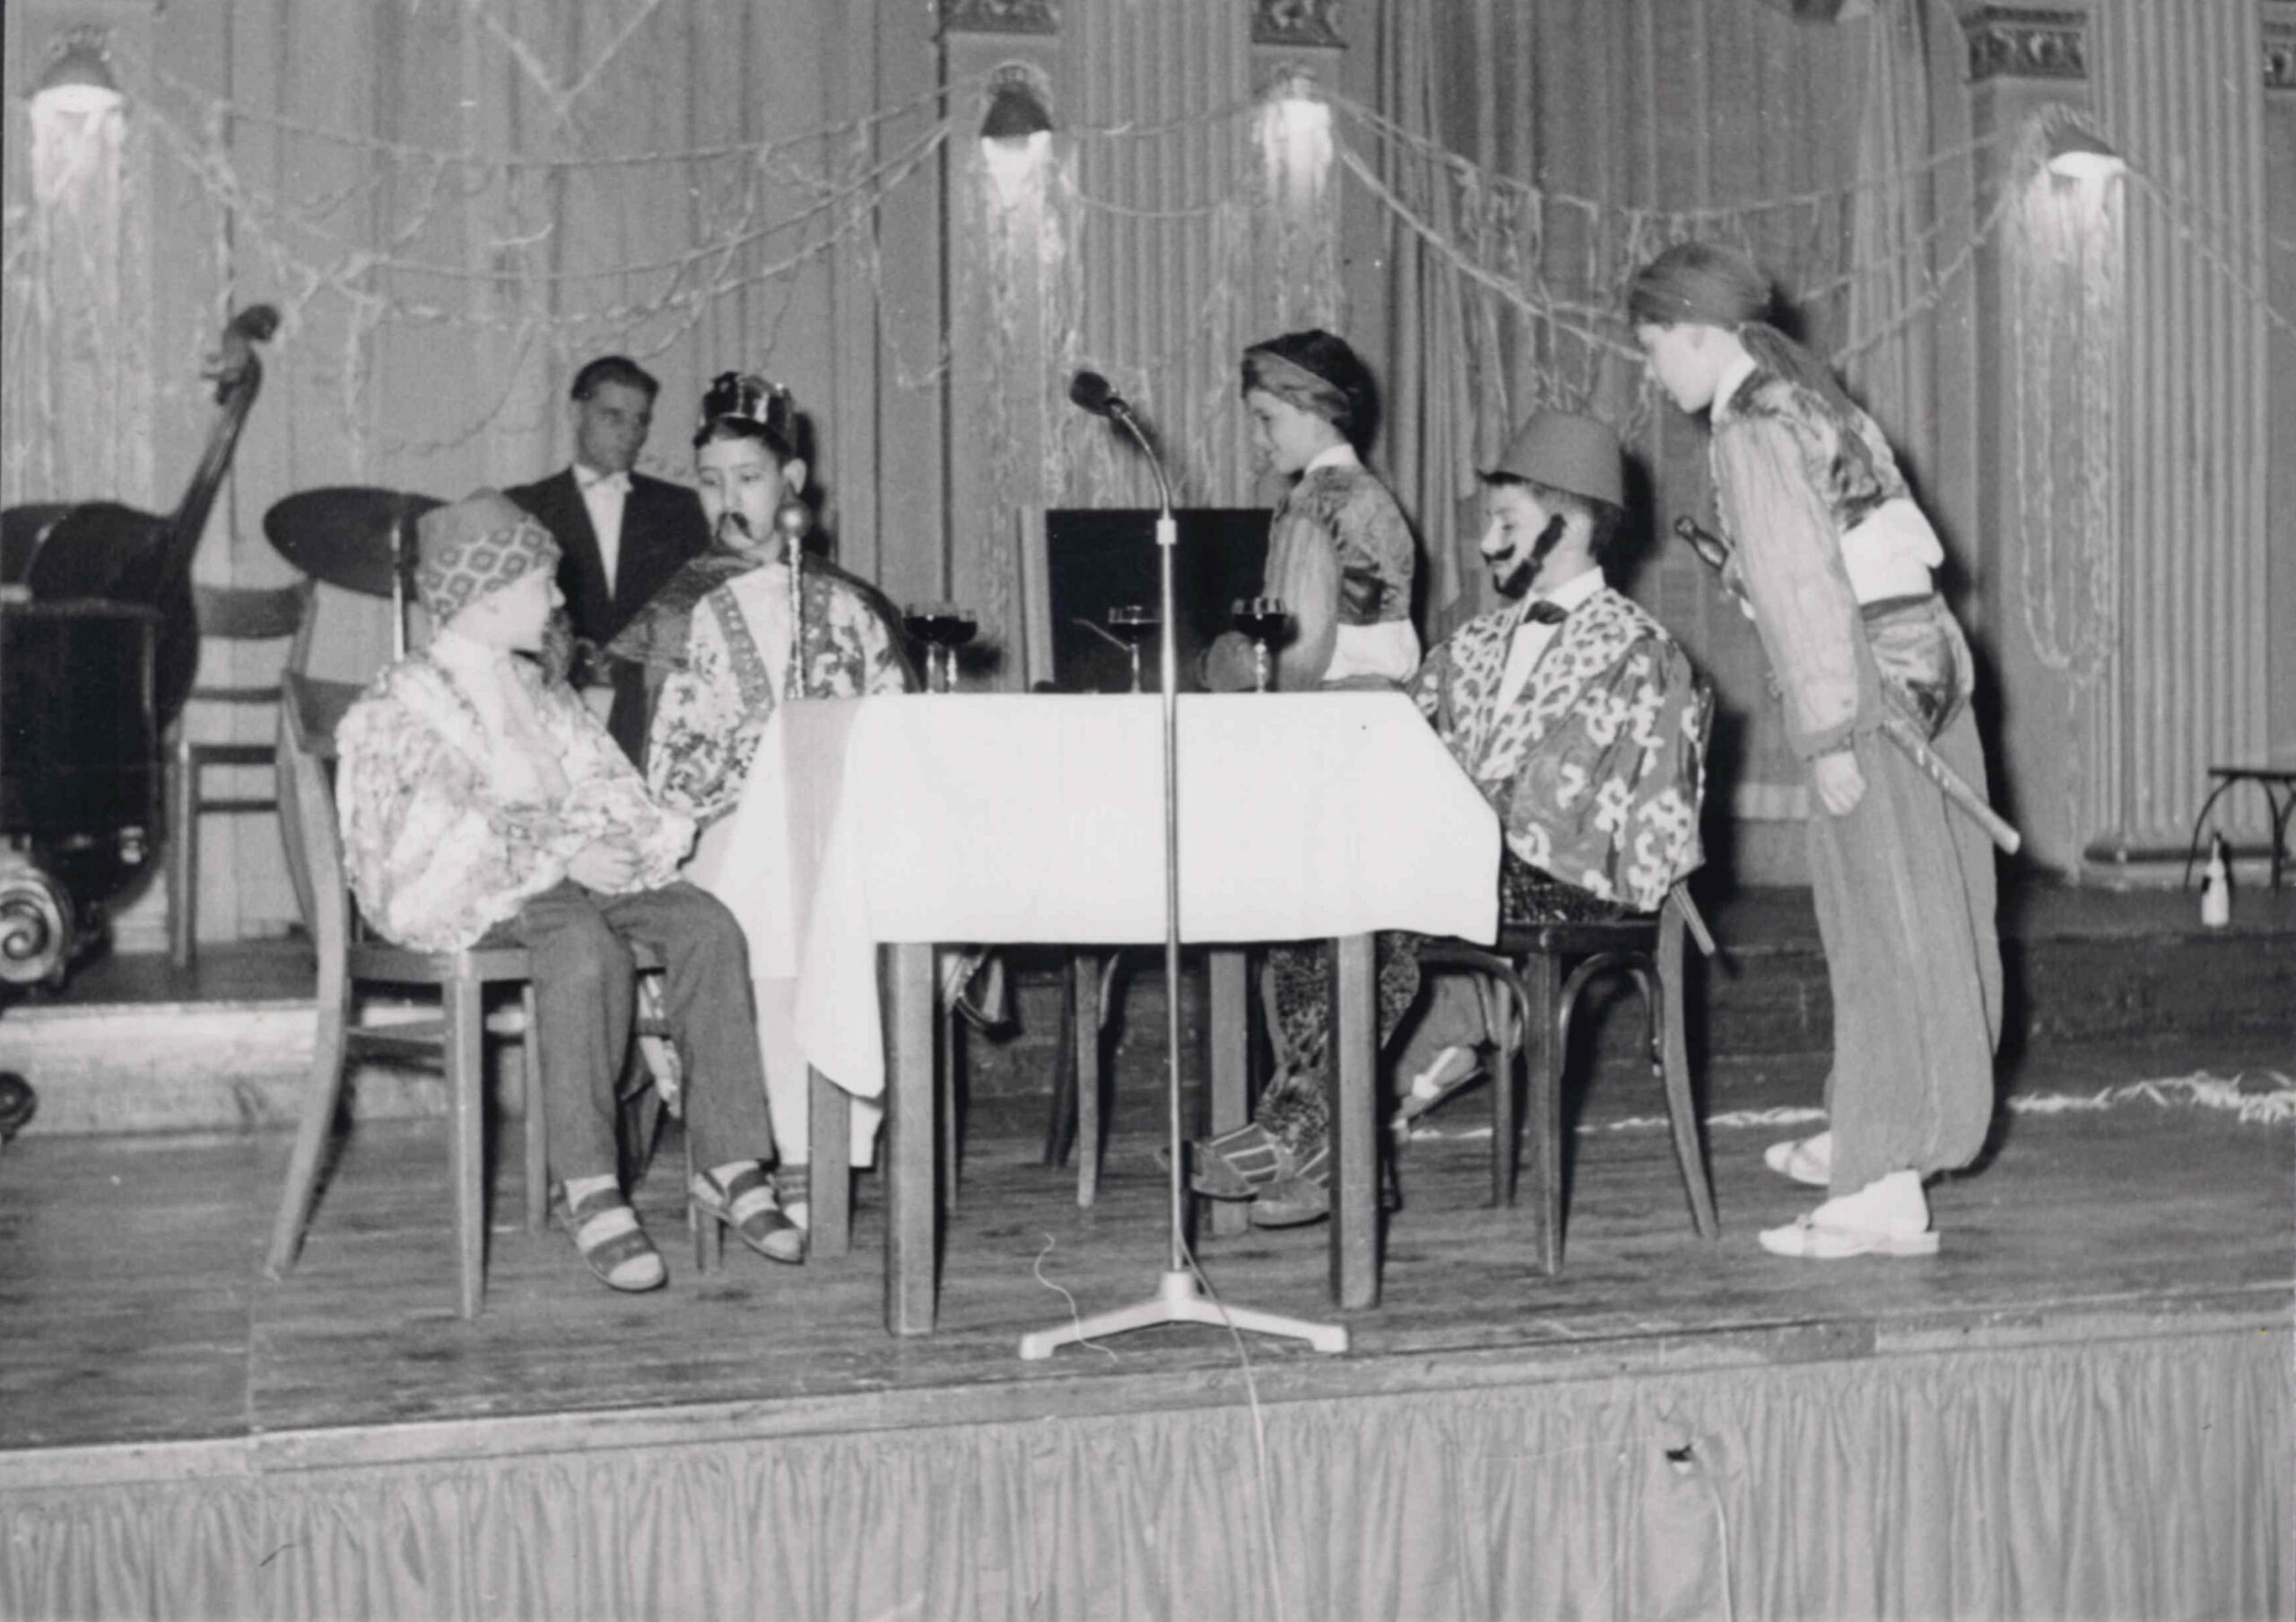 Purim celebration at the Wiesbaden Casino Society in the early 1960s. Collection Jewish Community Wiesbaden